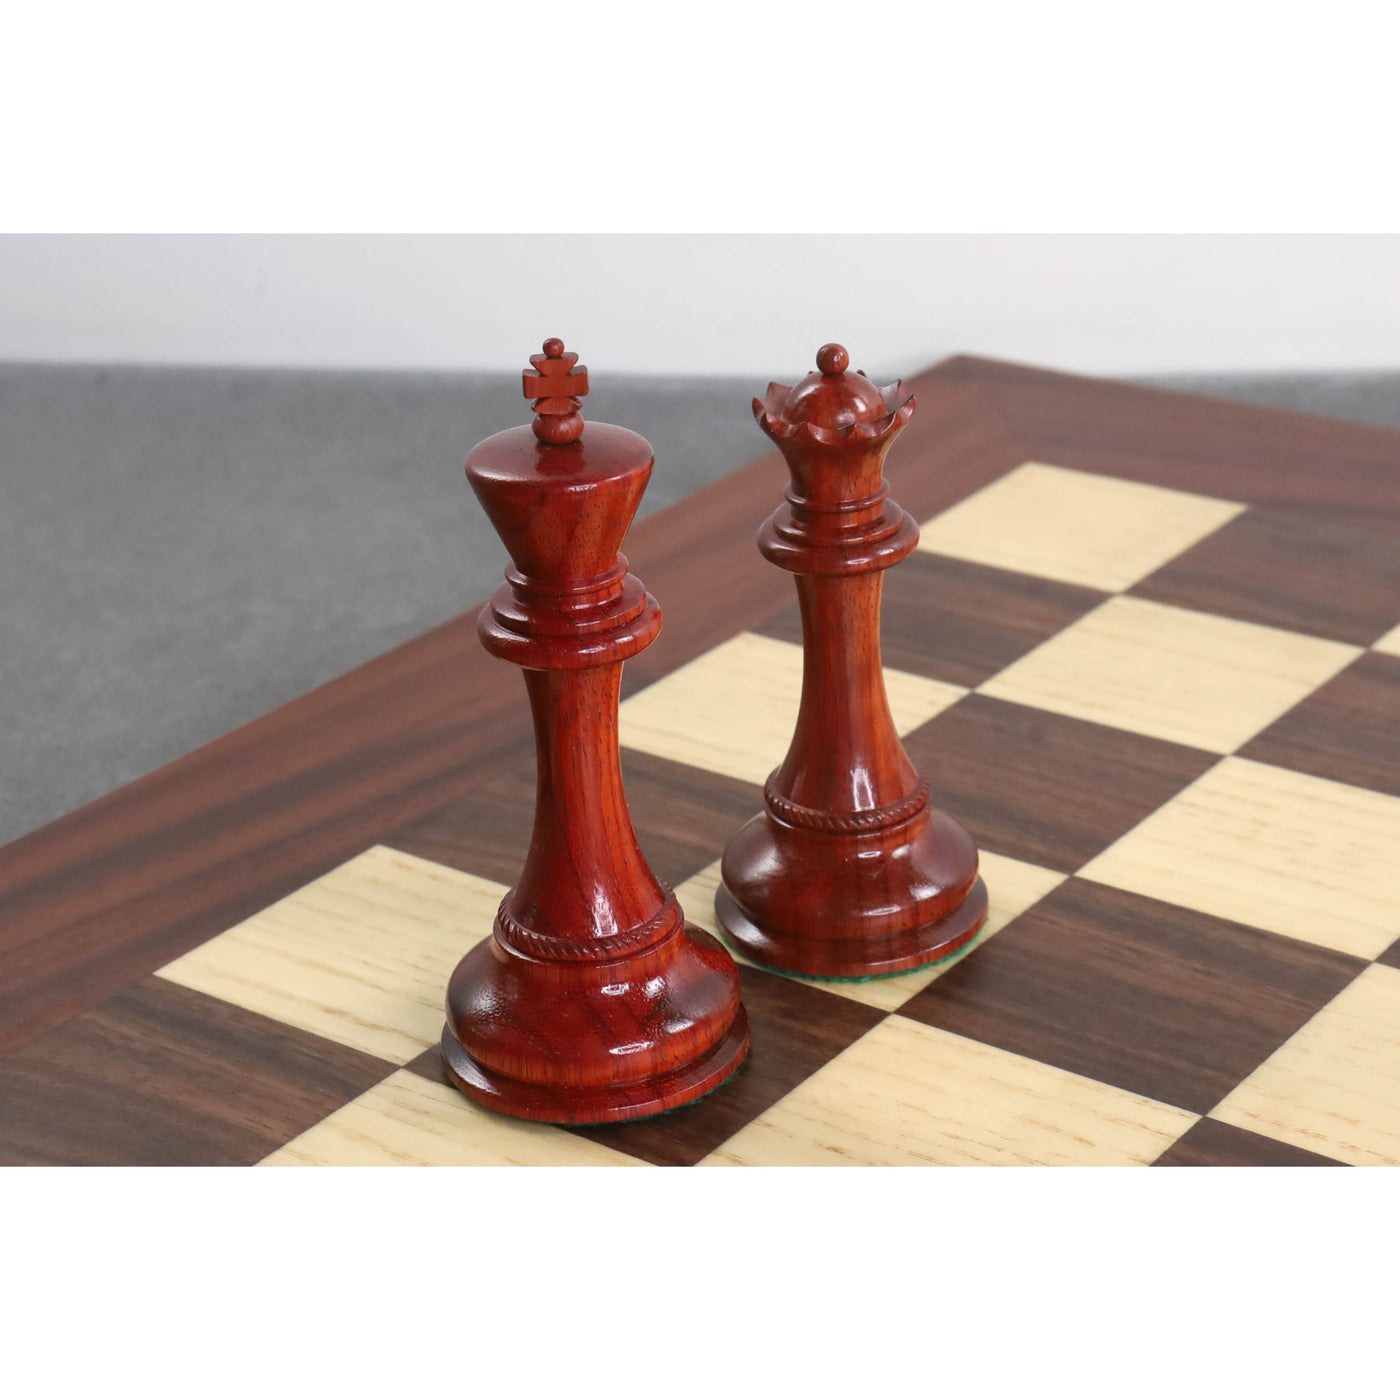 Slightly Imperfect 4.5" Imperator Luxury Staunton Chess Set - Chess Pieces Only - Bud Rosewood -Triple Weight